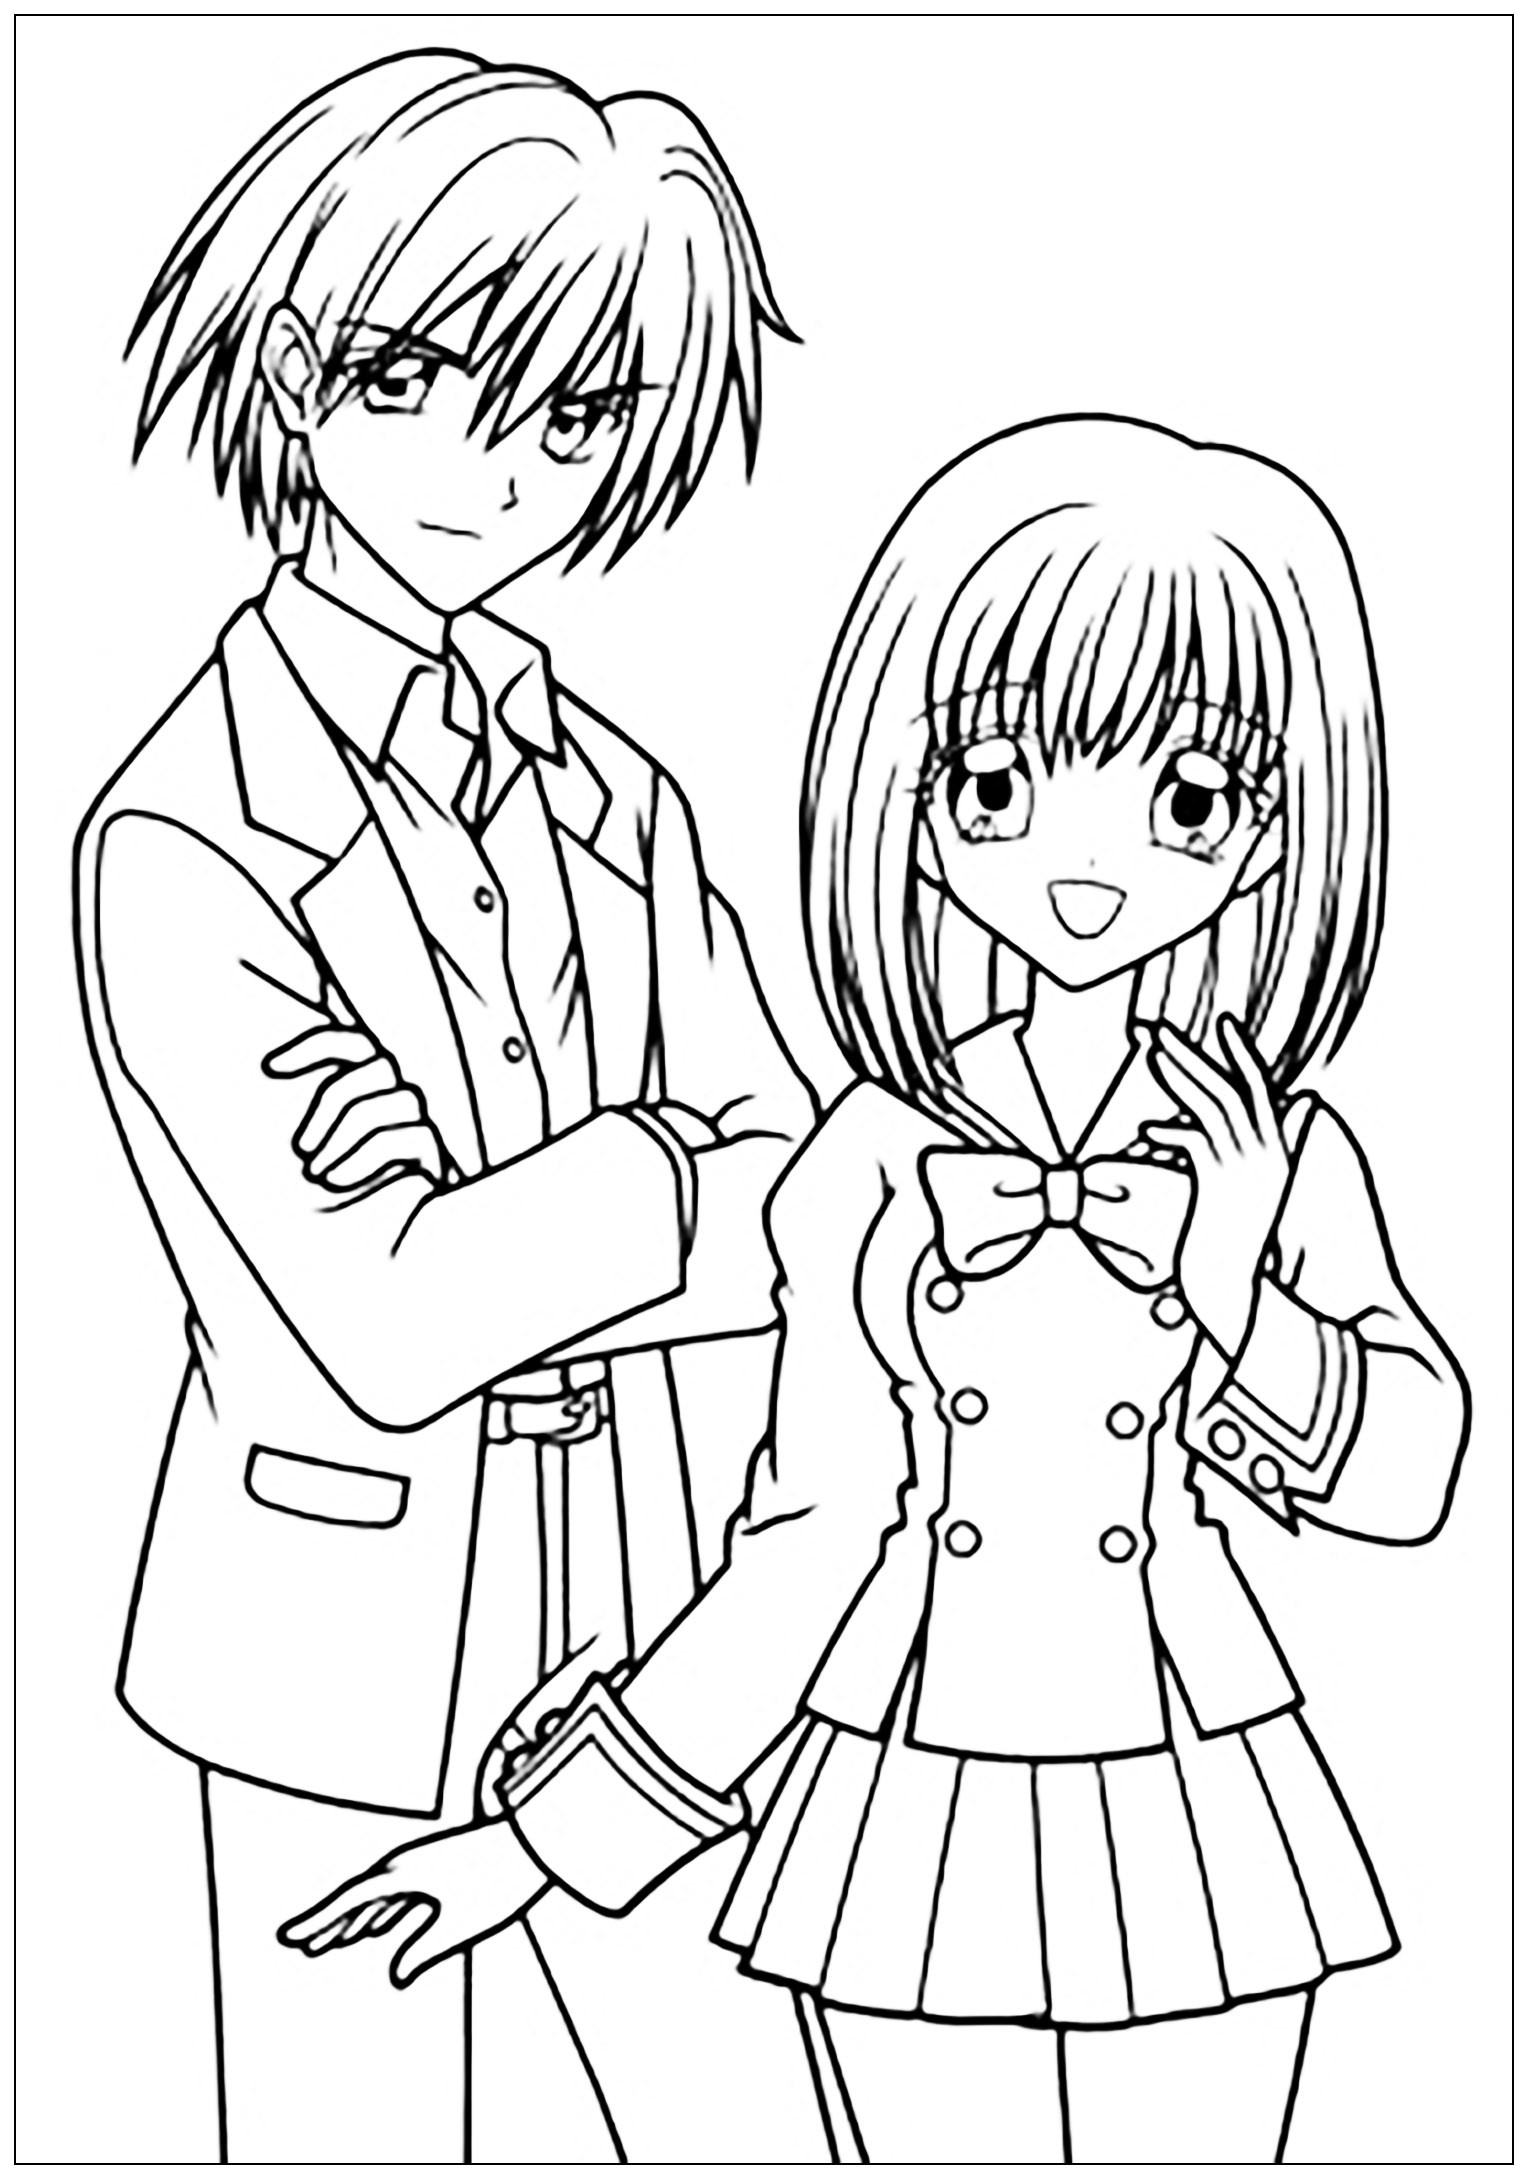 Boys And Girls Coloring Pages
 Manga drawing boy and girl in school suit Manga Anime